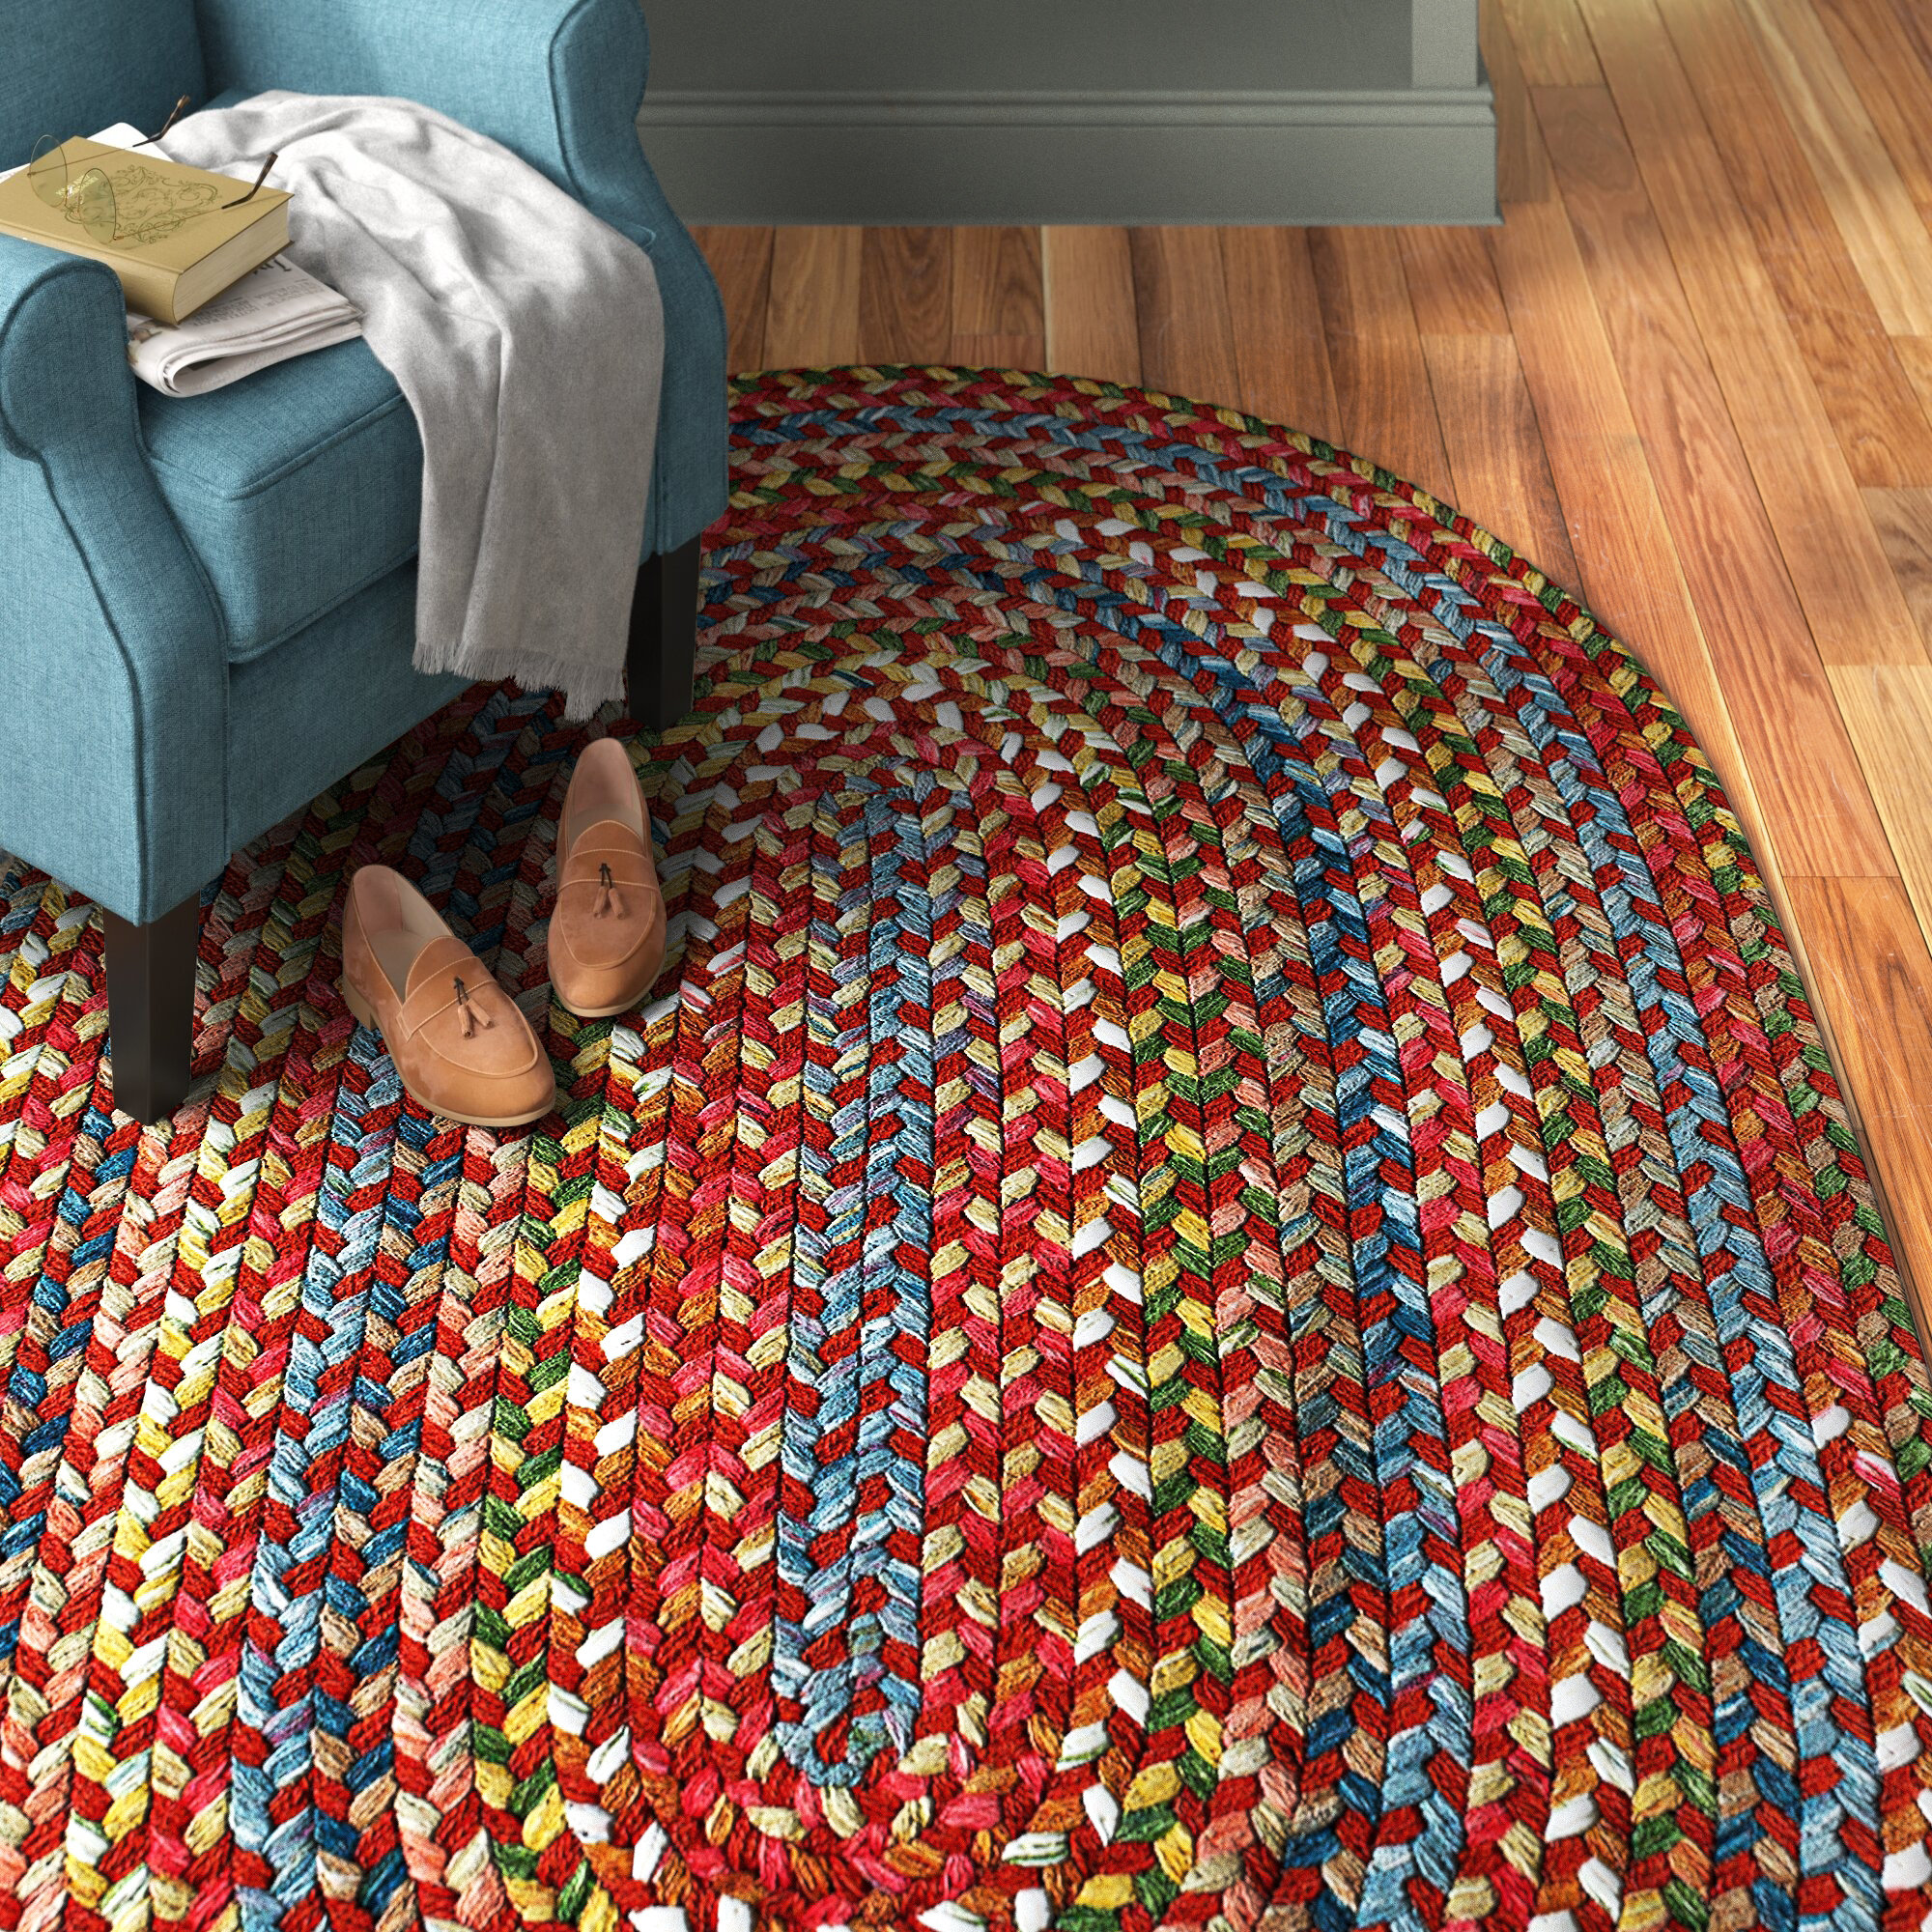 Top 10 Cotton Braided Area Rugs in 2023